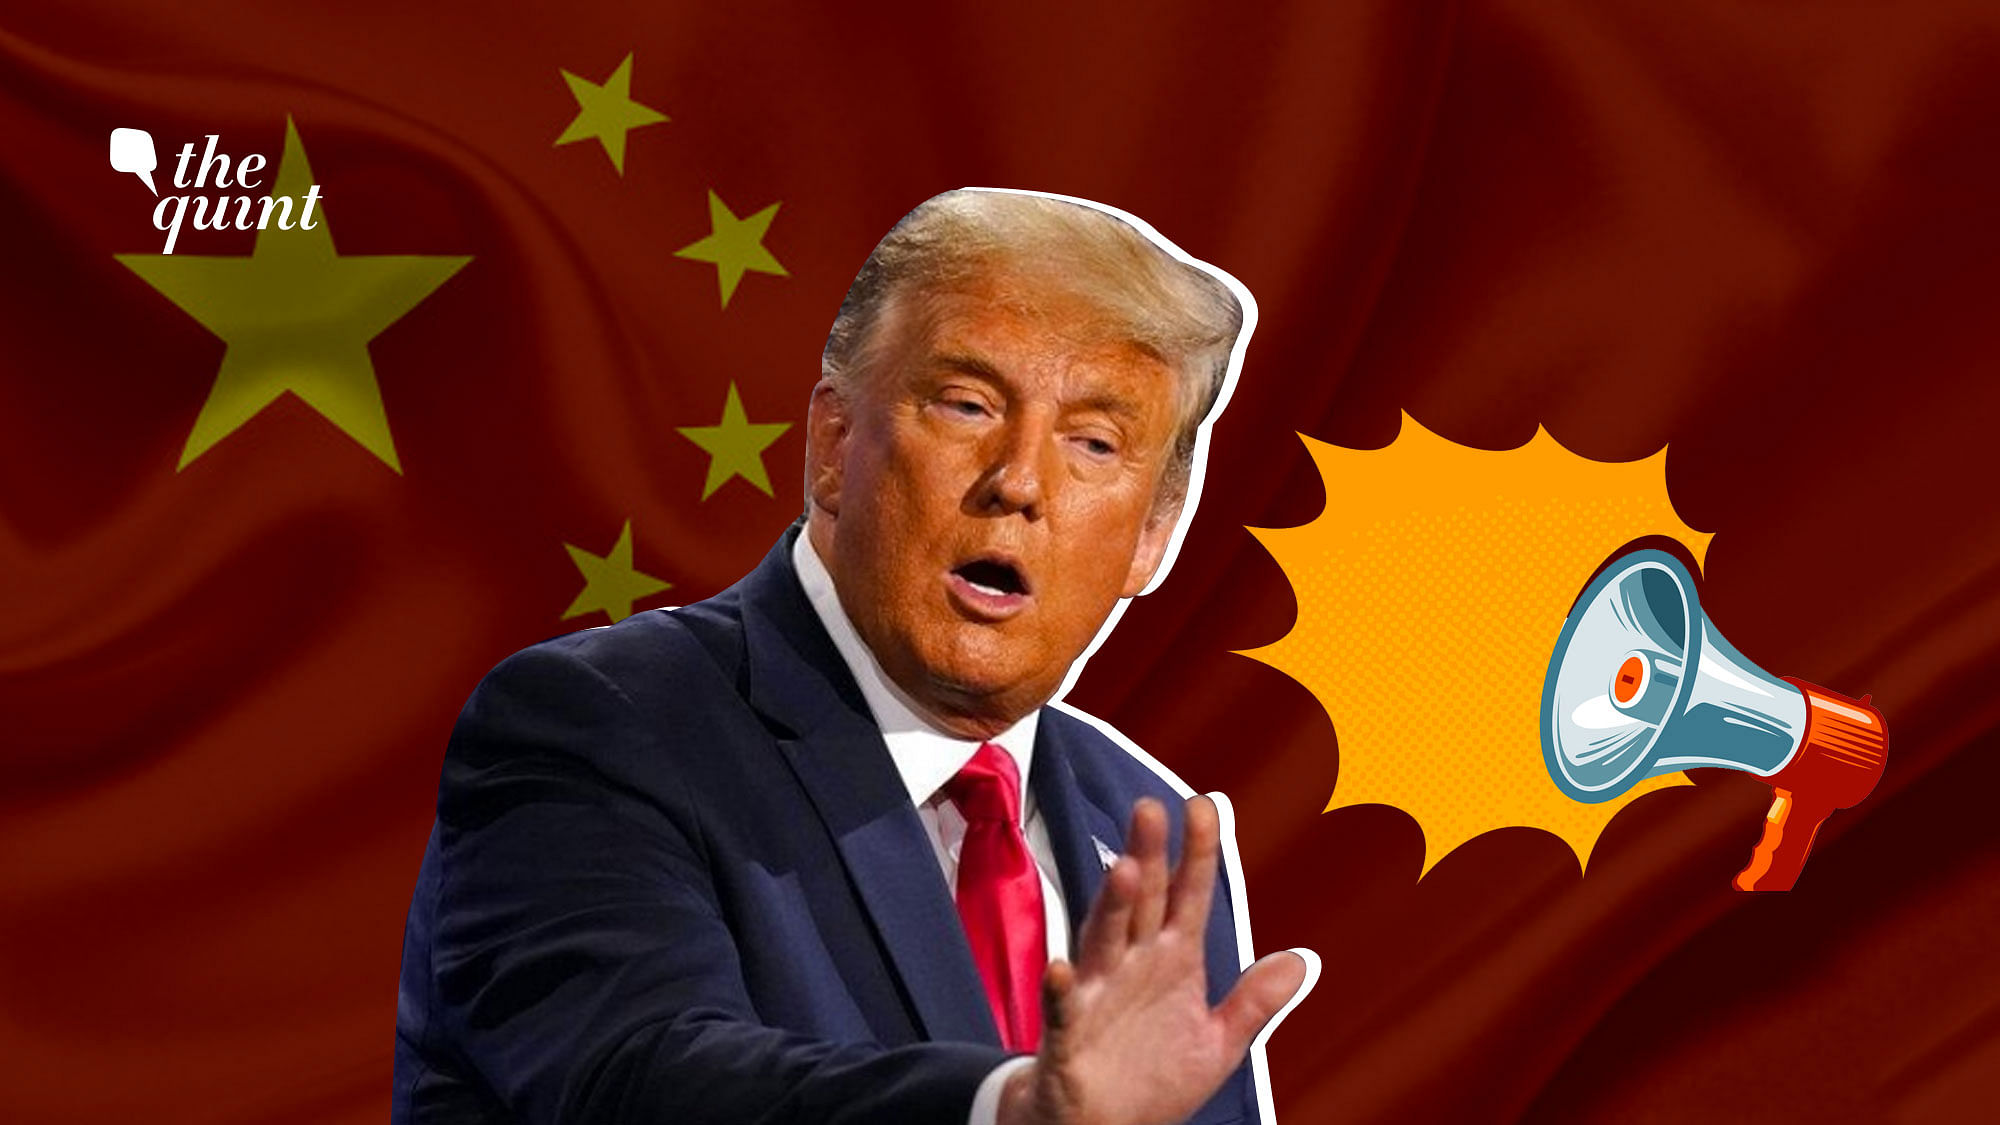 Image of Trump and China flag used for representational purposes.